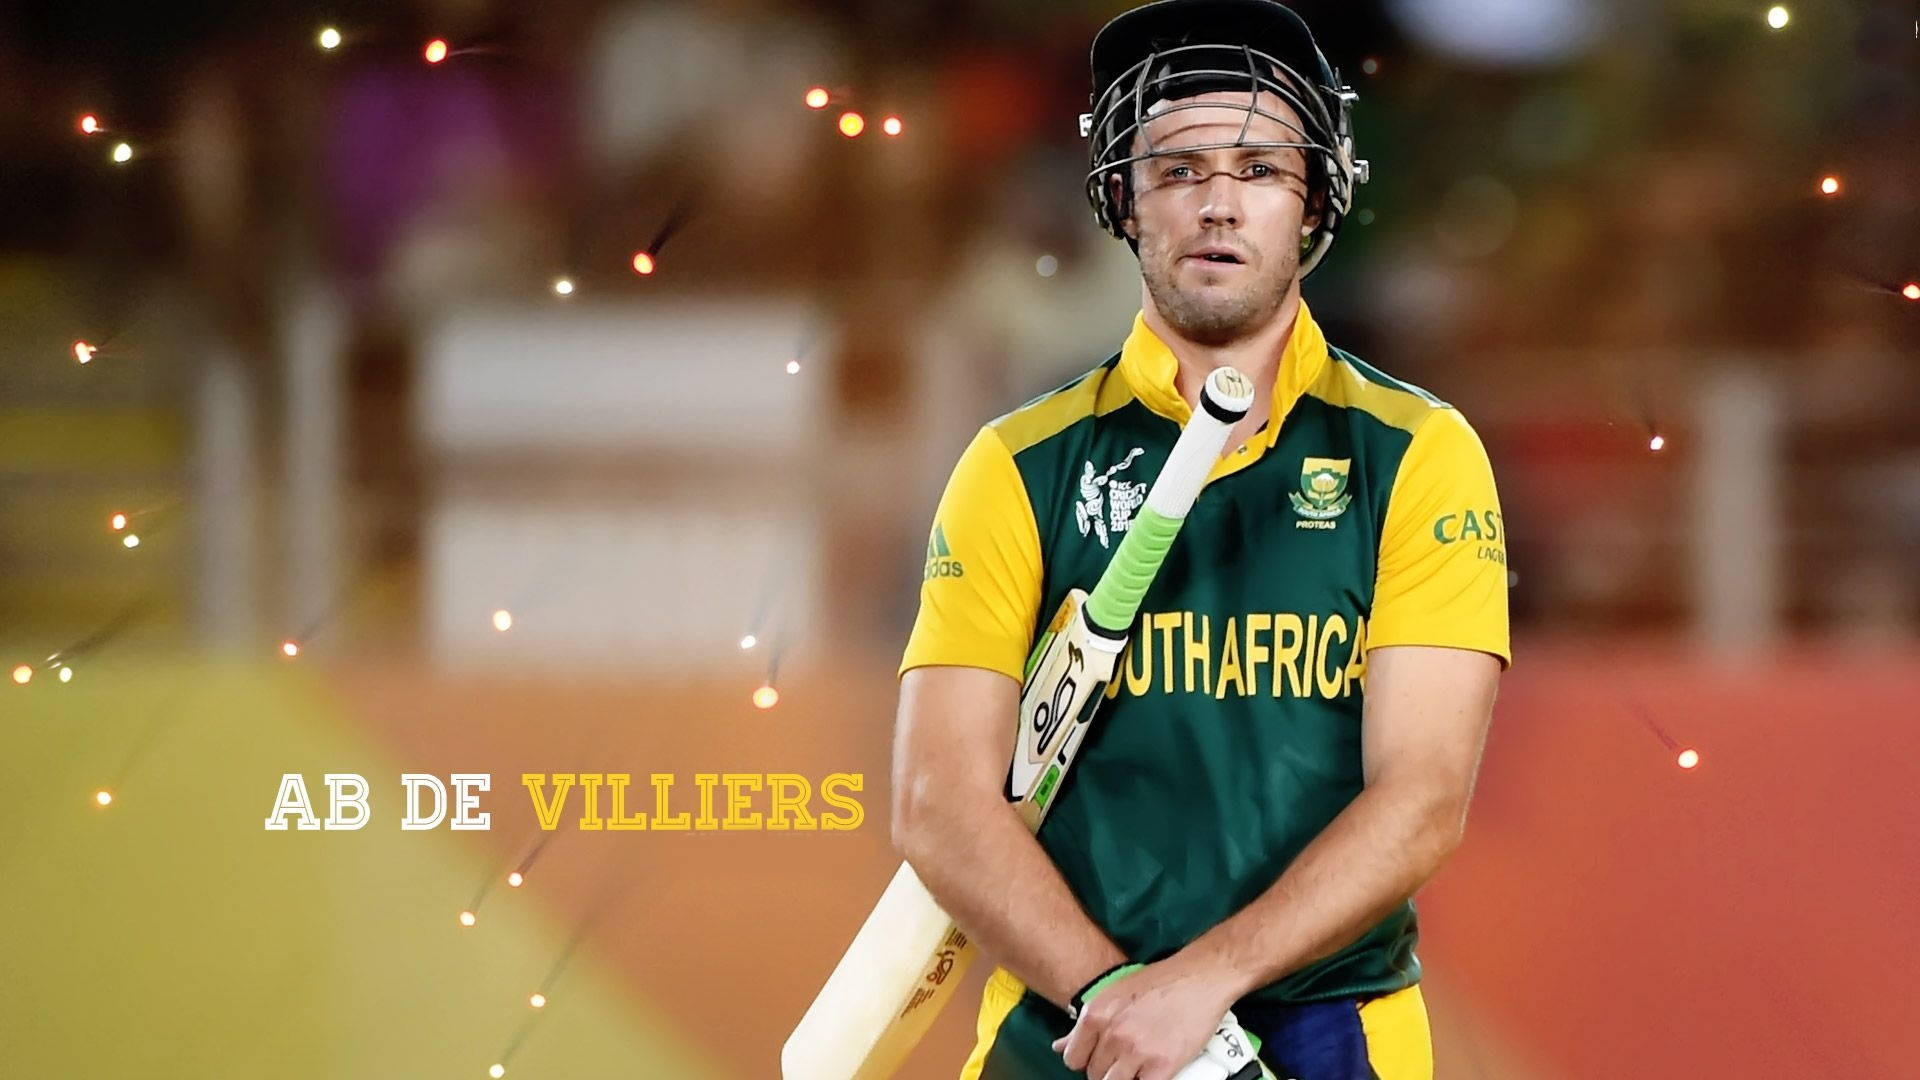 De Villiers epic reaction to SKYs theres only one 360degree player  remark  Cricket  Hindustan Times